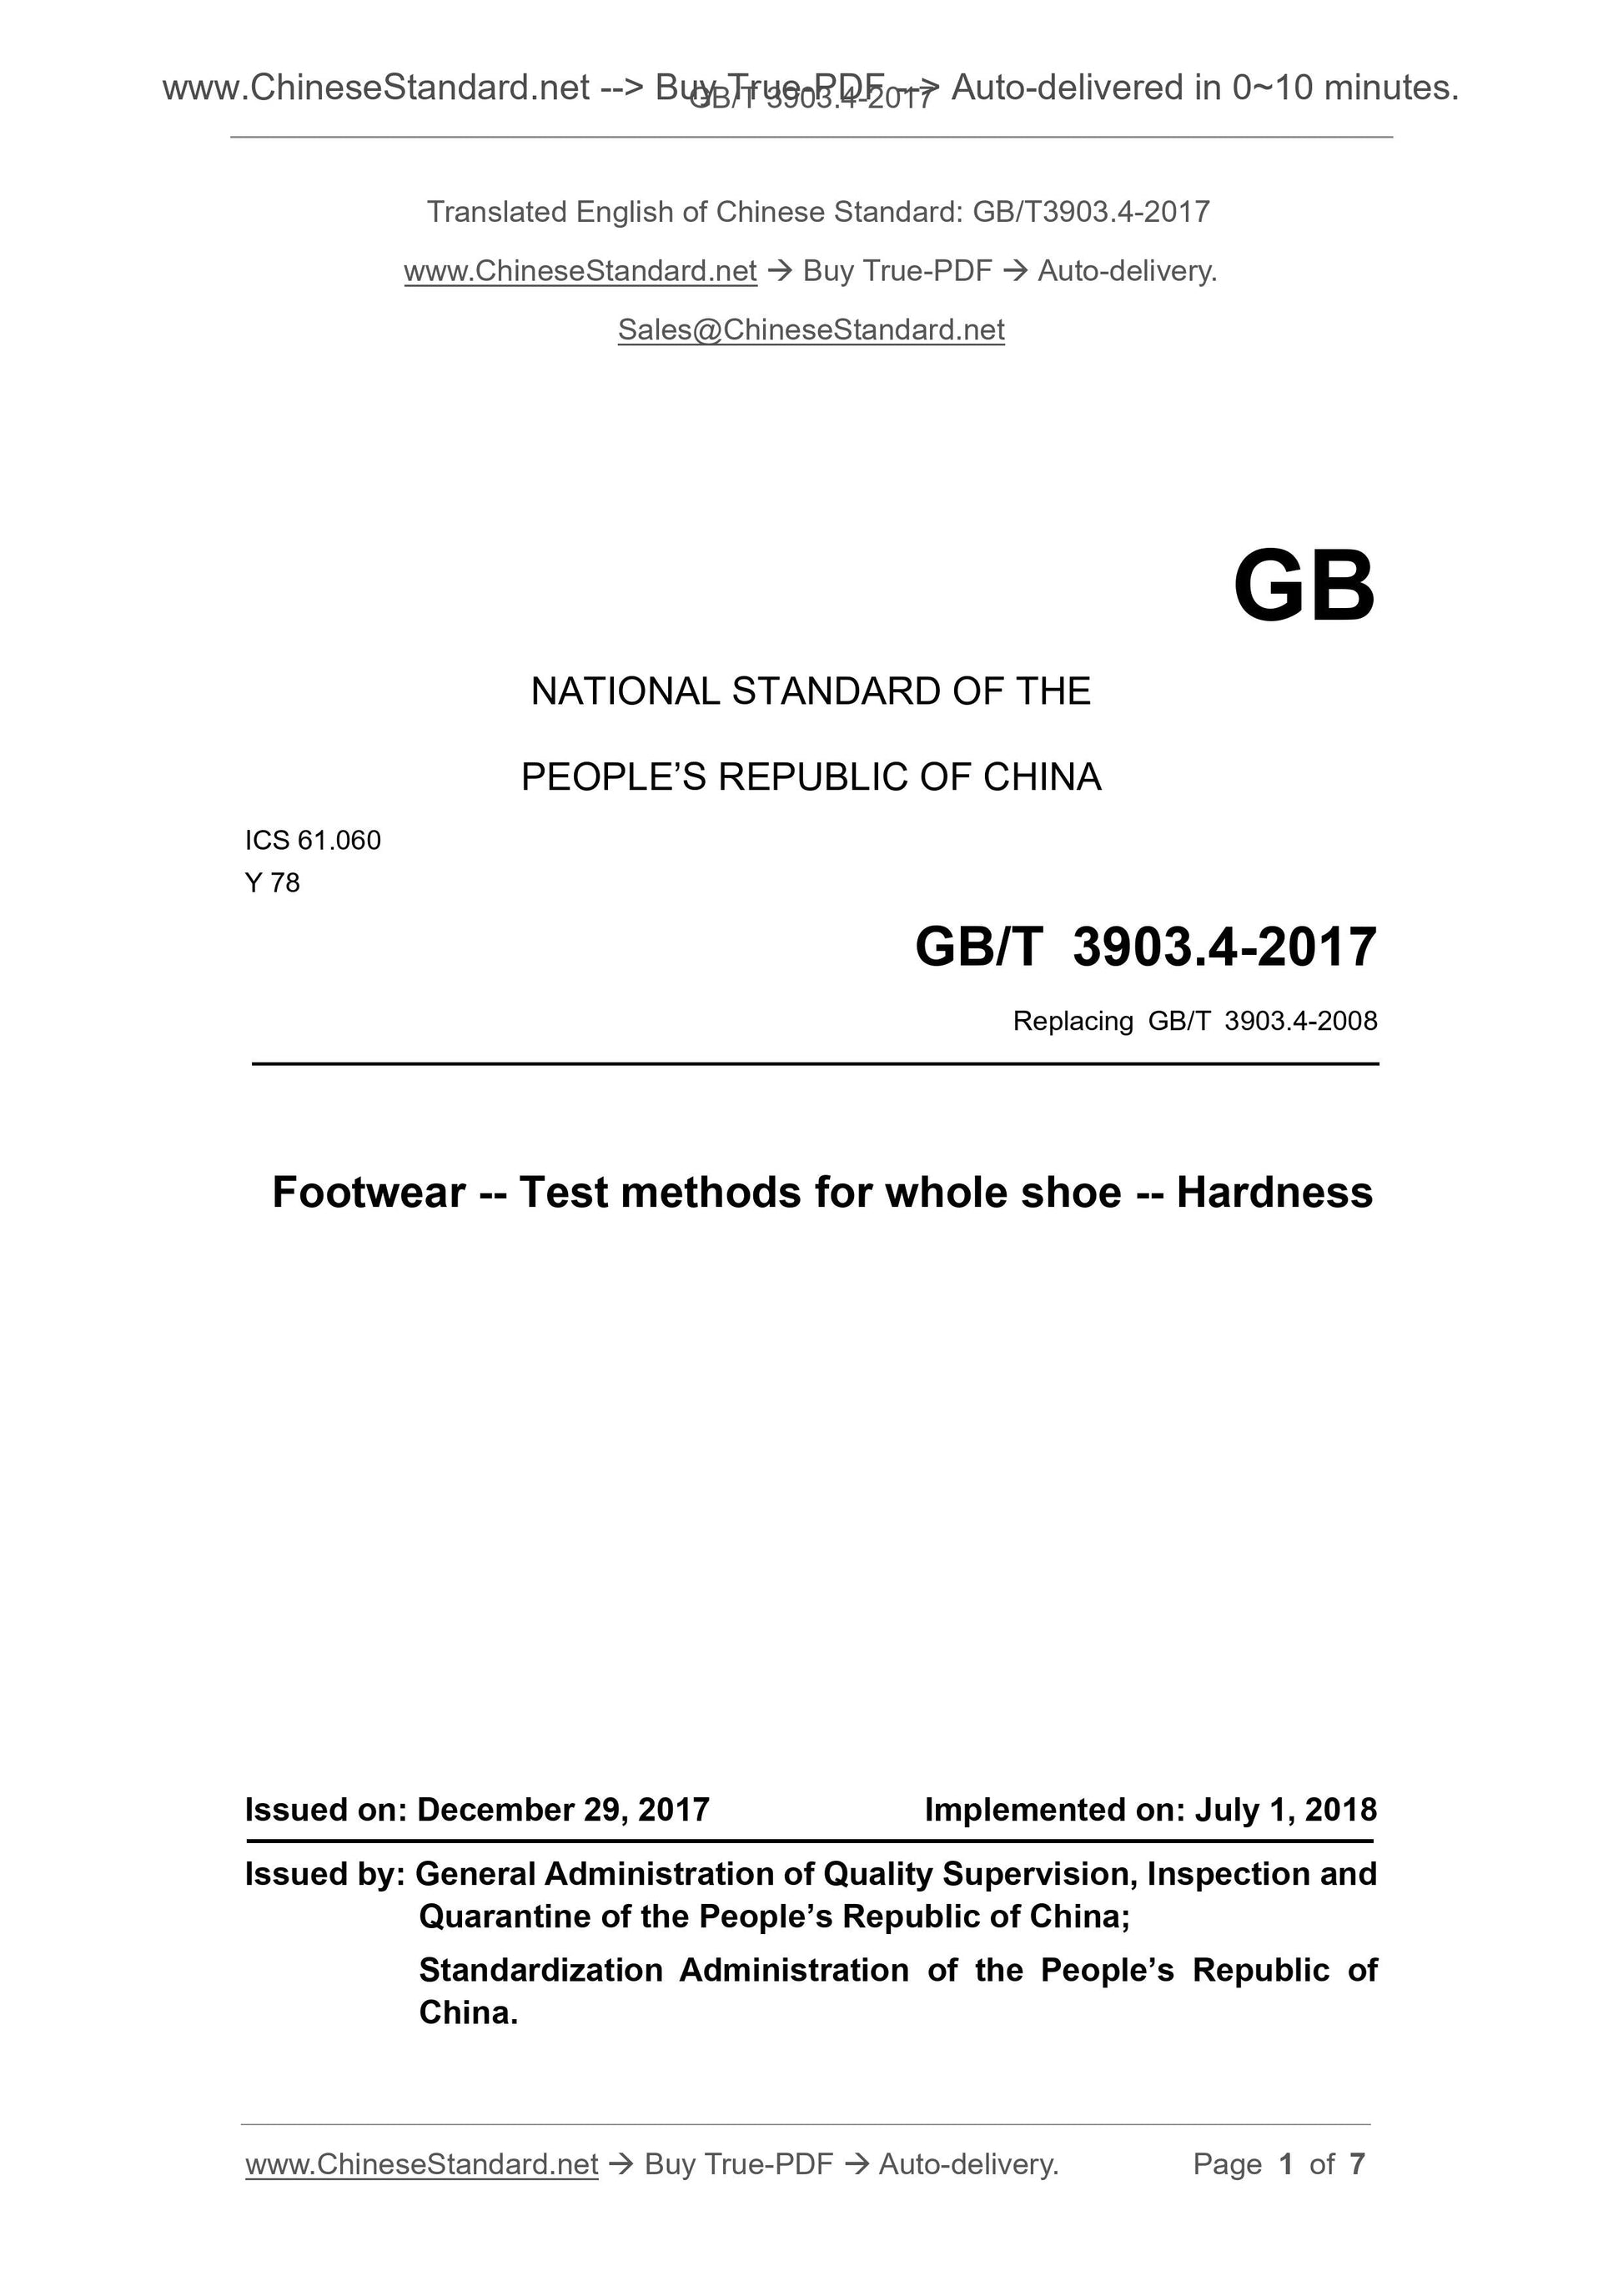 GB/T 3903.4-2017 Page 1